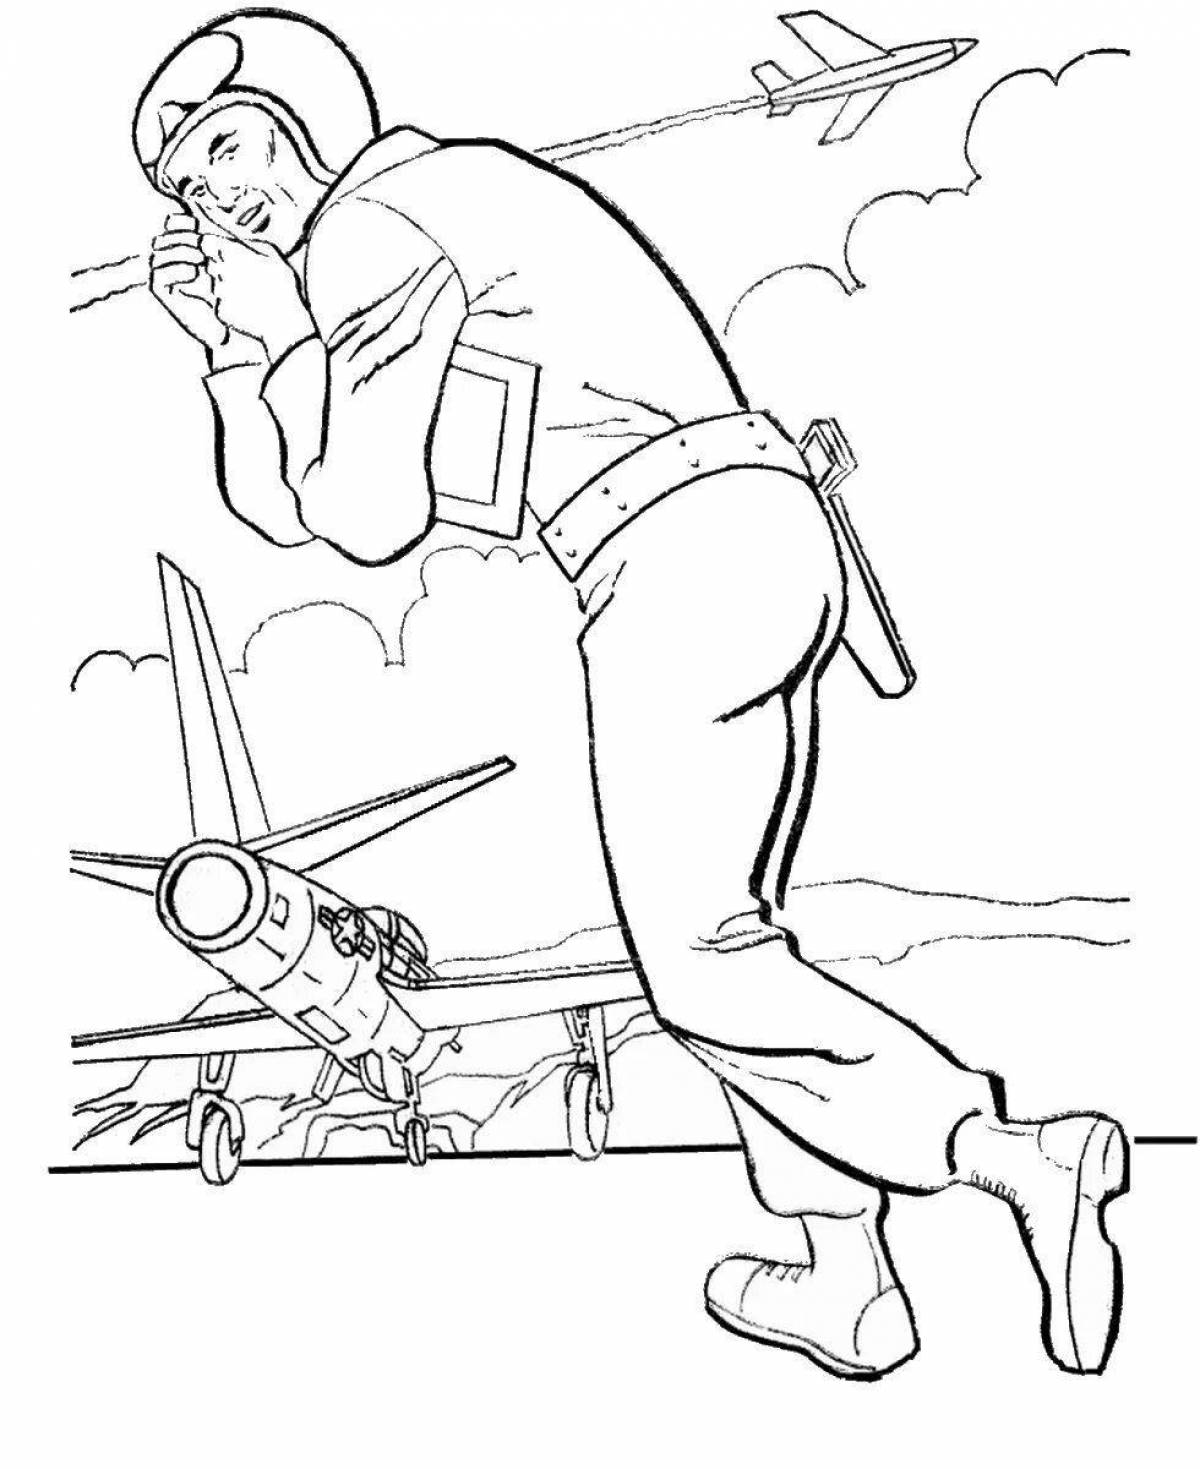 Colourful military pilot coloring book for kids